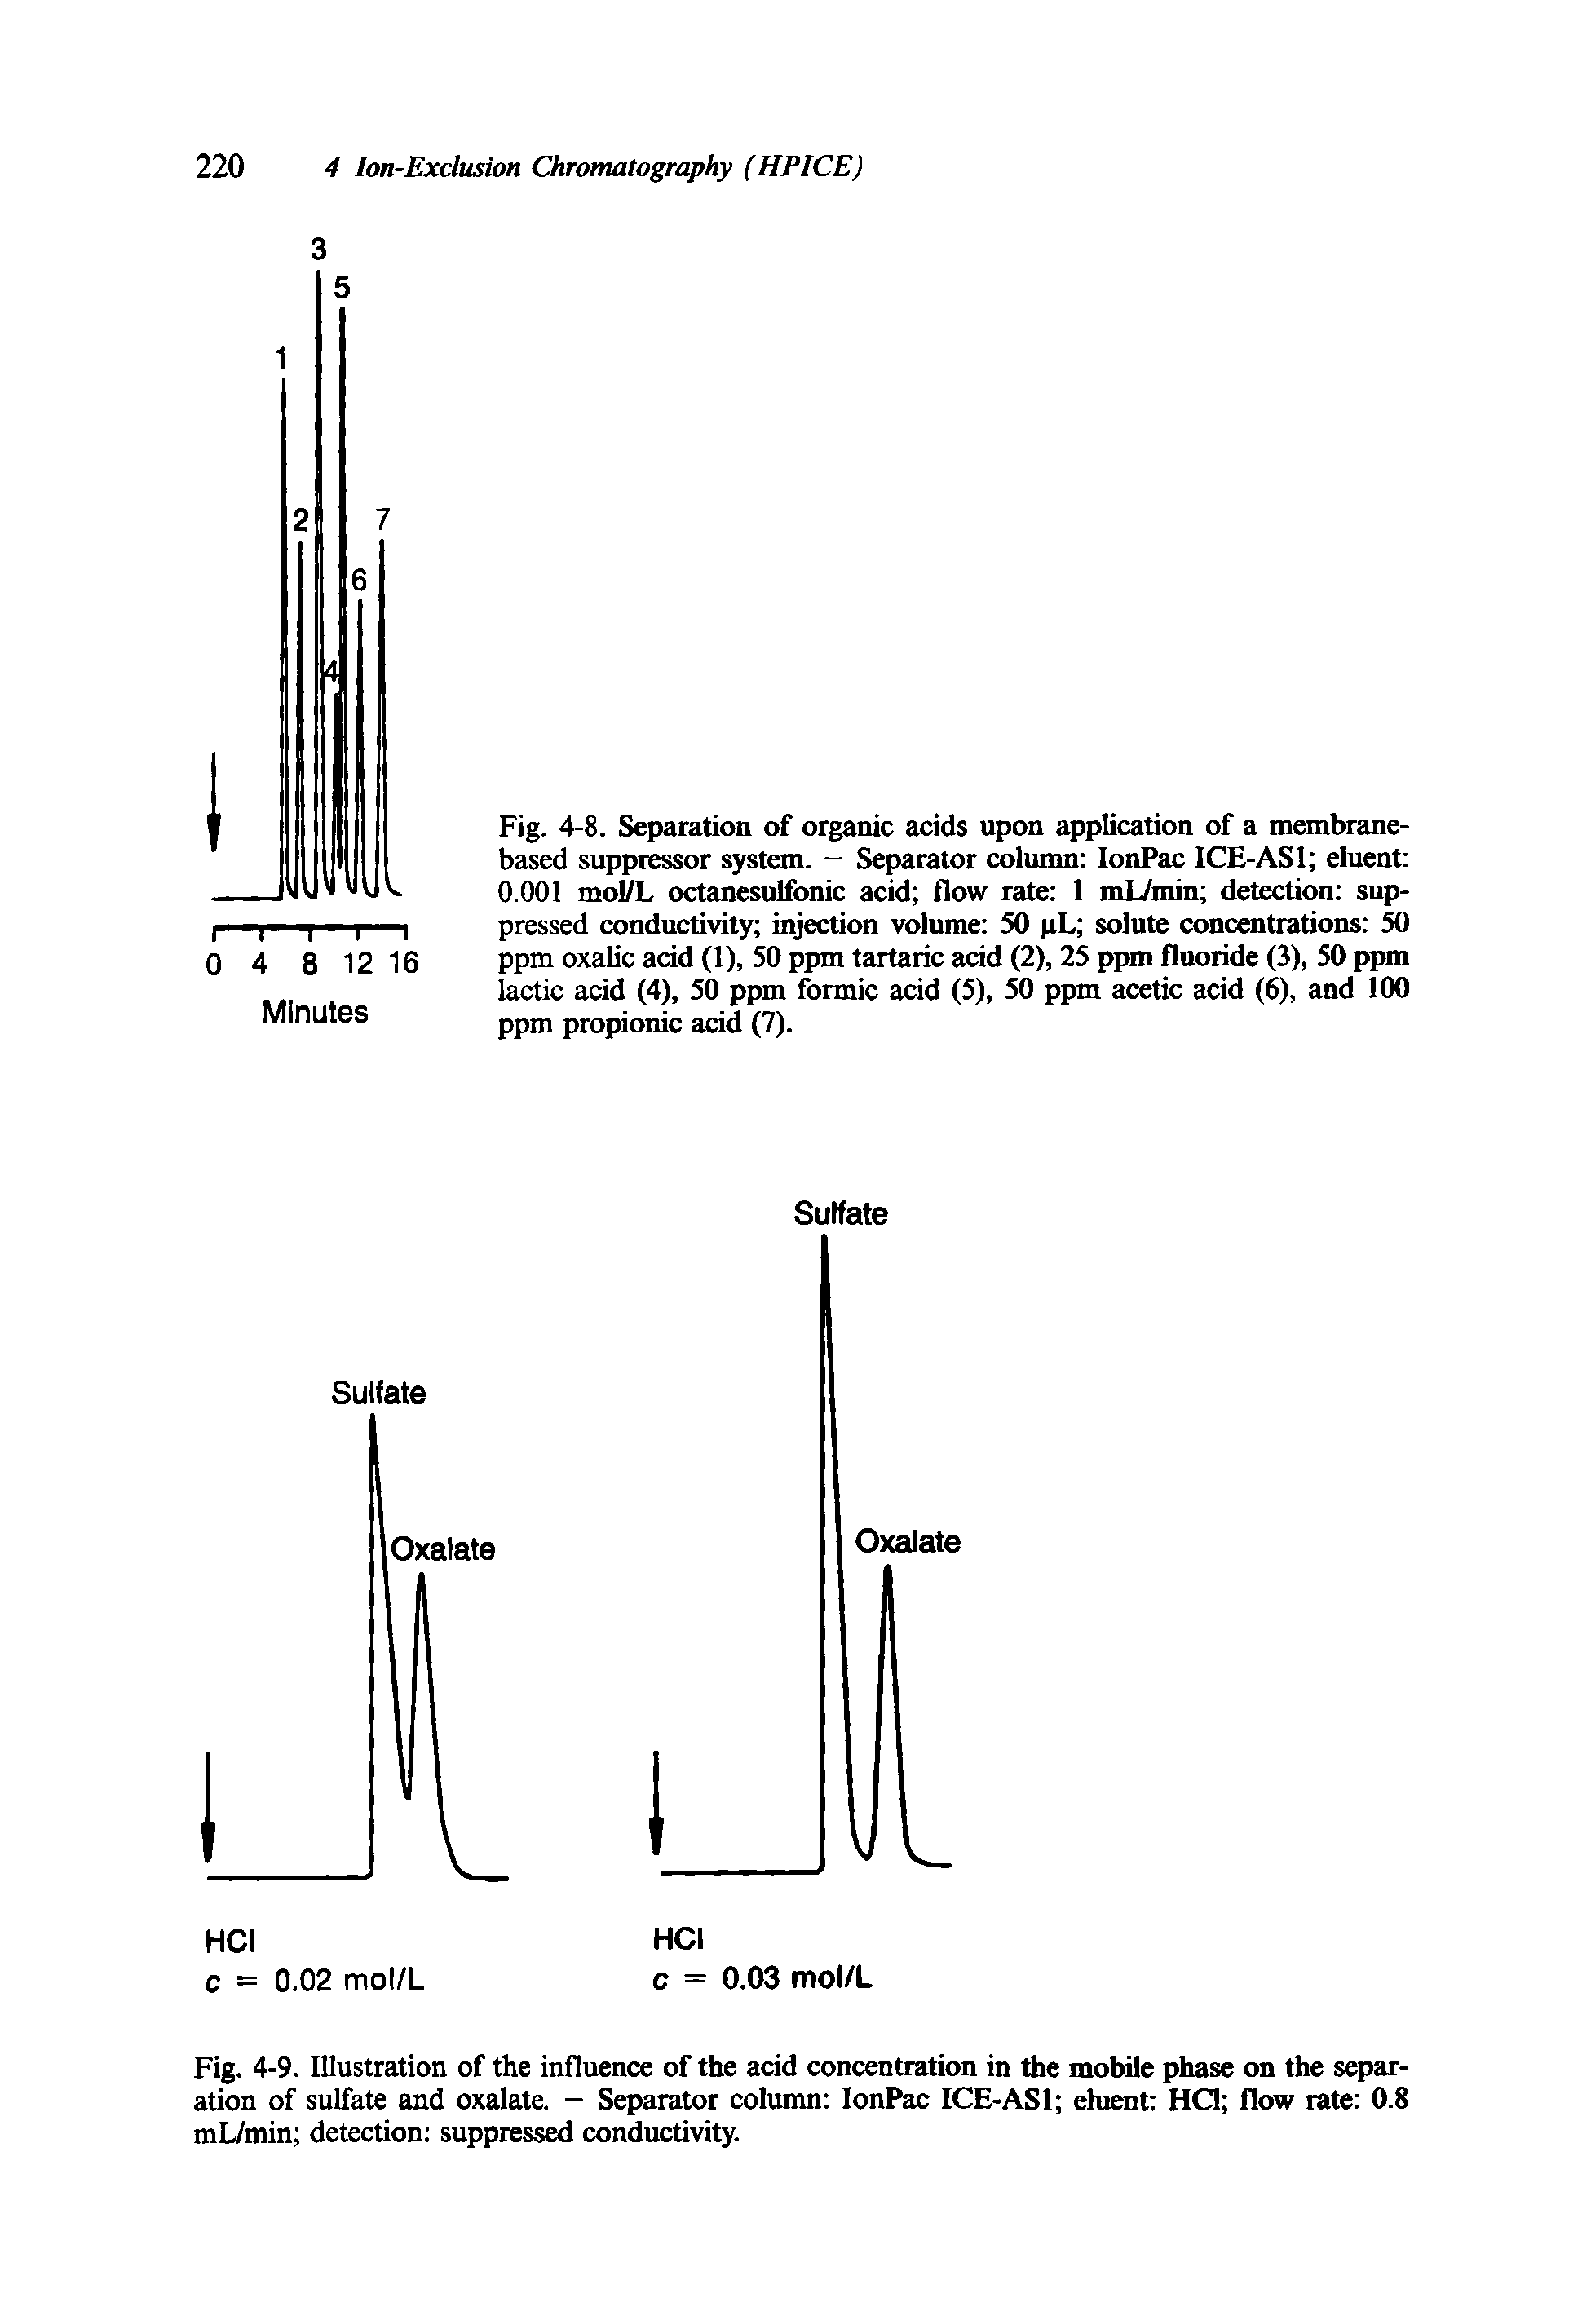 Fig. 4-8. Separation of organic acids upon application of a membrane-based suppressor system. — Separator column IonPac ICE-AS1 eluent 0.001 mol/L octanesulfonic acid flow rate 1 mL/min detection suppressed conductivity injection volume 50 pL solute concentrations 50 ppm oxalic acid (1), 50 ppm tartaric acid (2), 25 ppm fluoride (3), 50 ppm lactic acid (4), 50 ppm formic acid (5), 50 ppm acetic acid (6), and 100 ppm propionic acid (7).